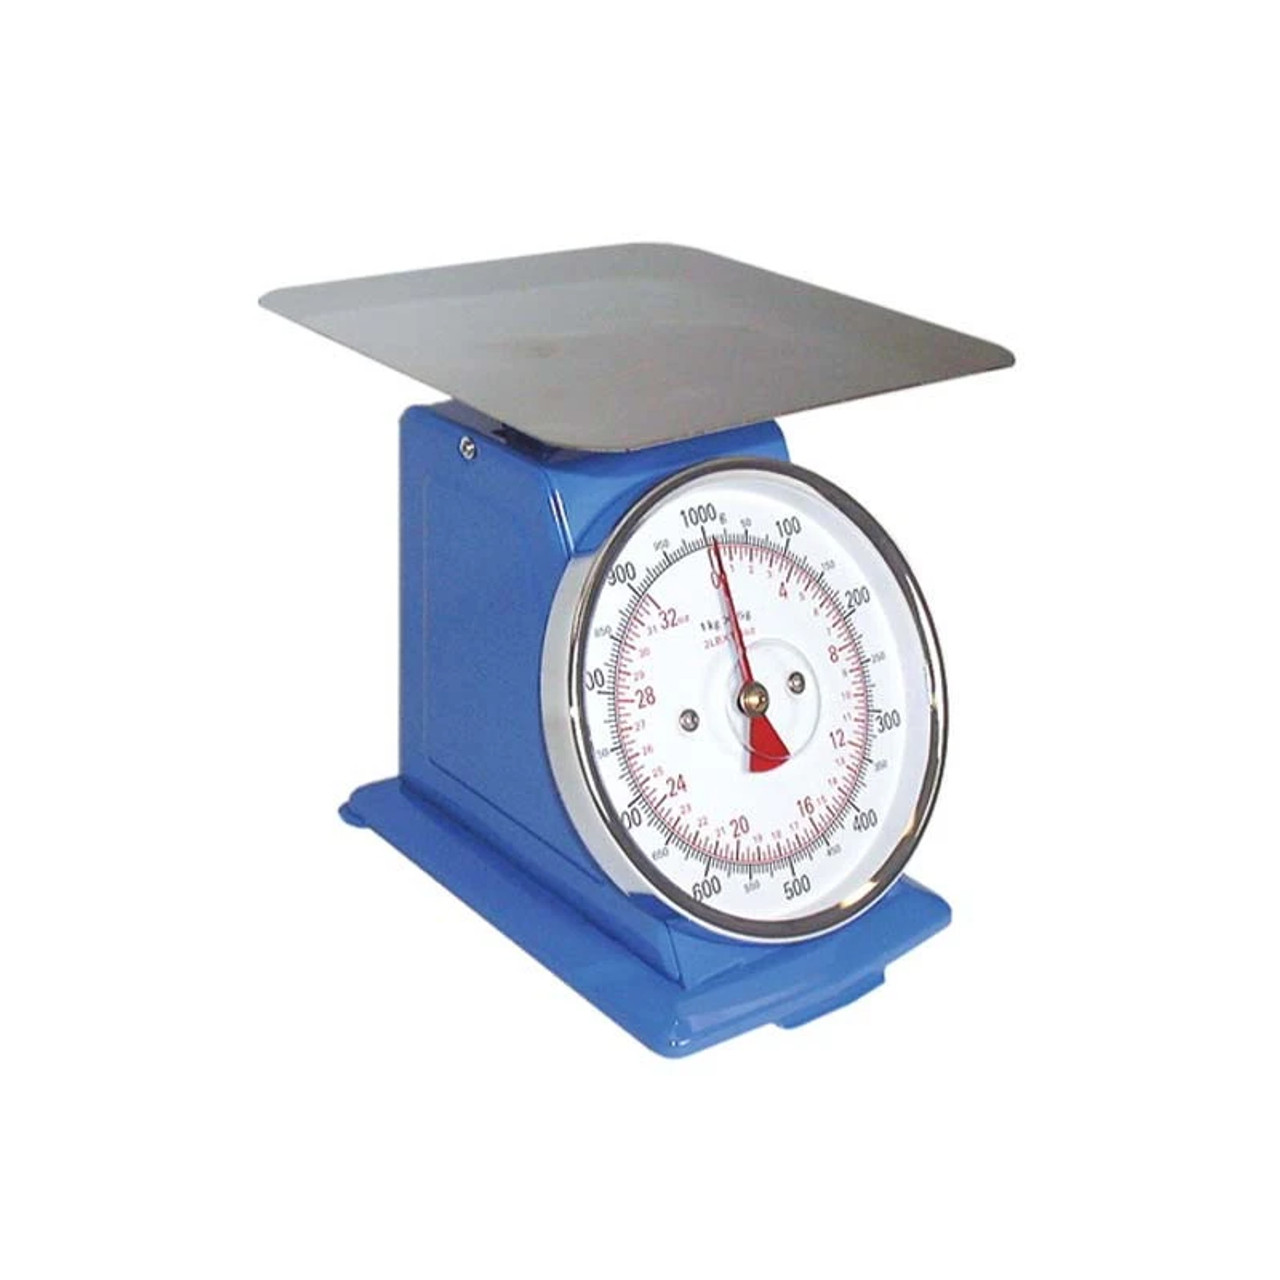 Dial Spring Scale - 5 kg / 11 lb.